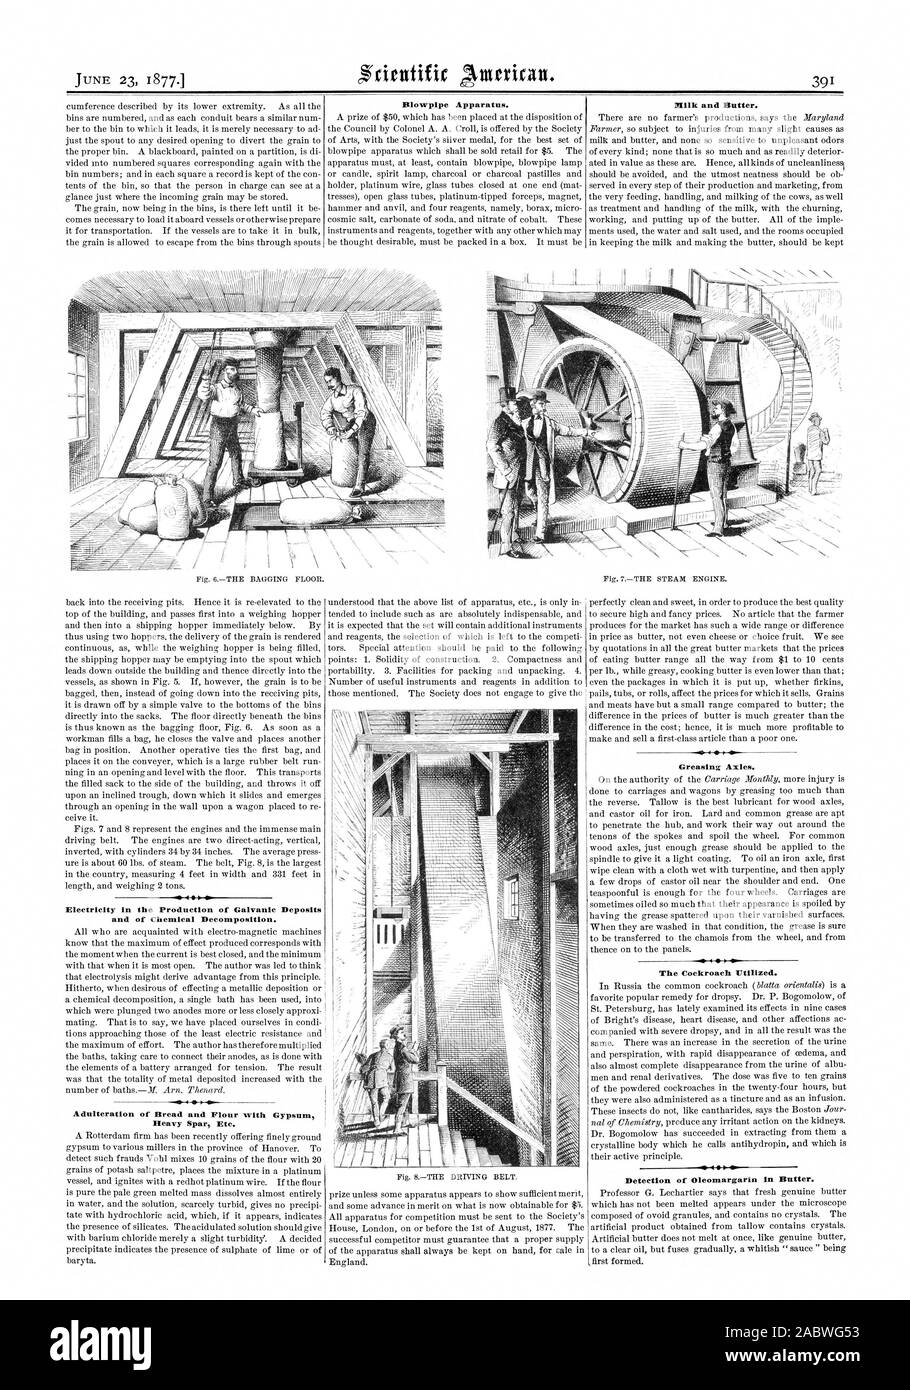 Blowpipe Apparatus. milk and Butter. Electricity in the Production of Galvanic Deposits and of Chemical Decomposition. Adulteration of Bread and Flour with Gypsum Heavy Spar Etc. Greasing Axles. The Cockroach Utilized. Detection of Oleomargarin in Butter. 0.0M .NaglIMMAos 'F. 0.01.6 gra=101Mra WEEMS, scientific american, 1877-06-23 Stock Photo